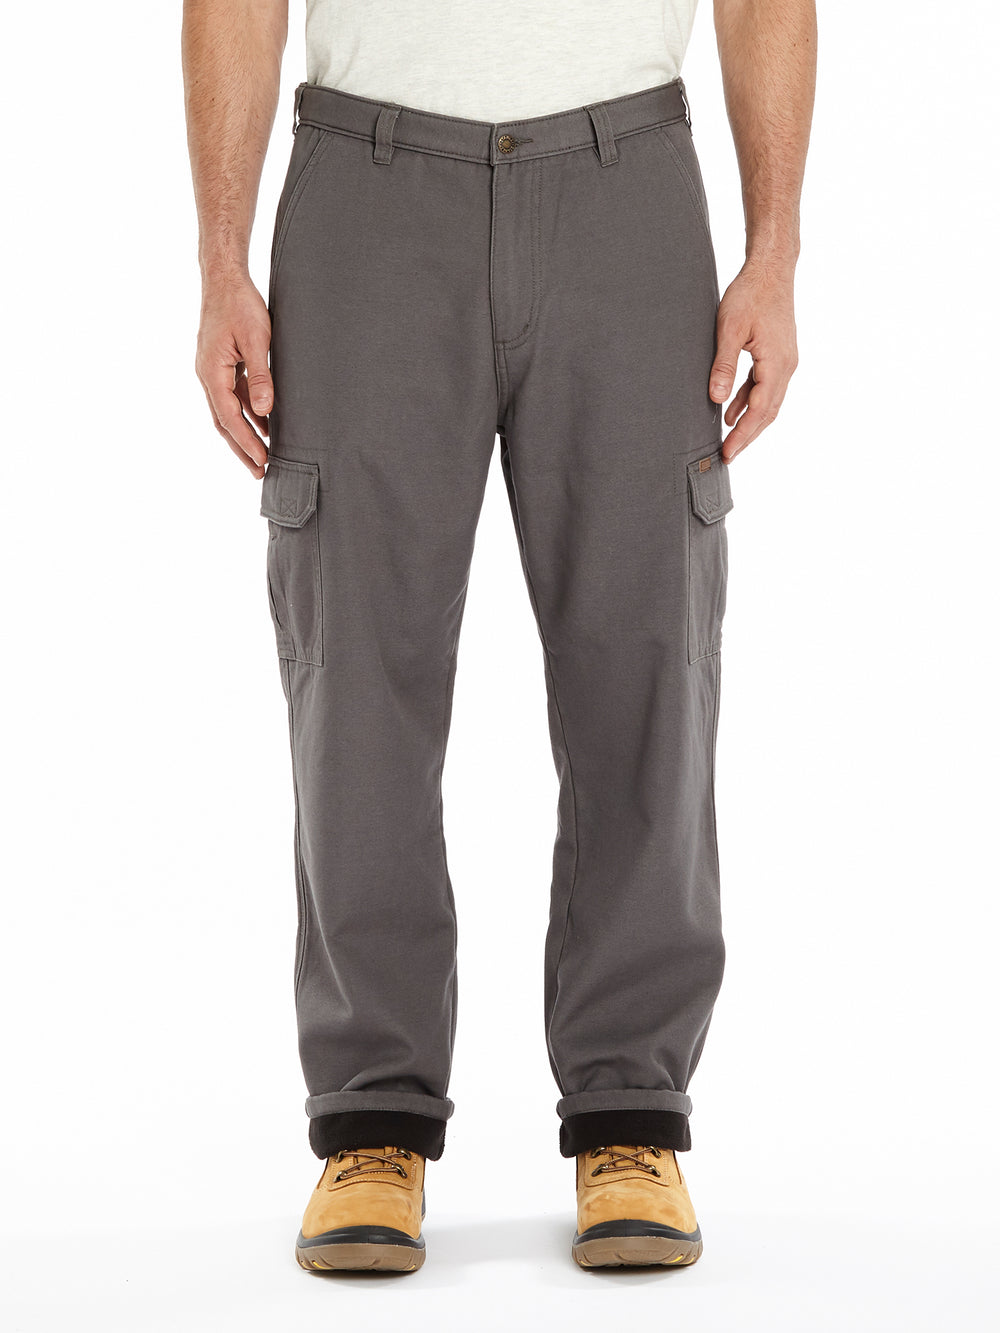 New Wrangler Cargo Pants Four Colors Available All Men's Sizes Relaxed Fit